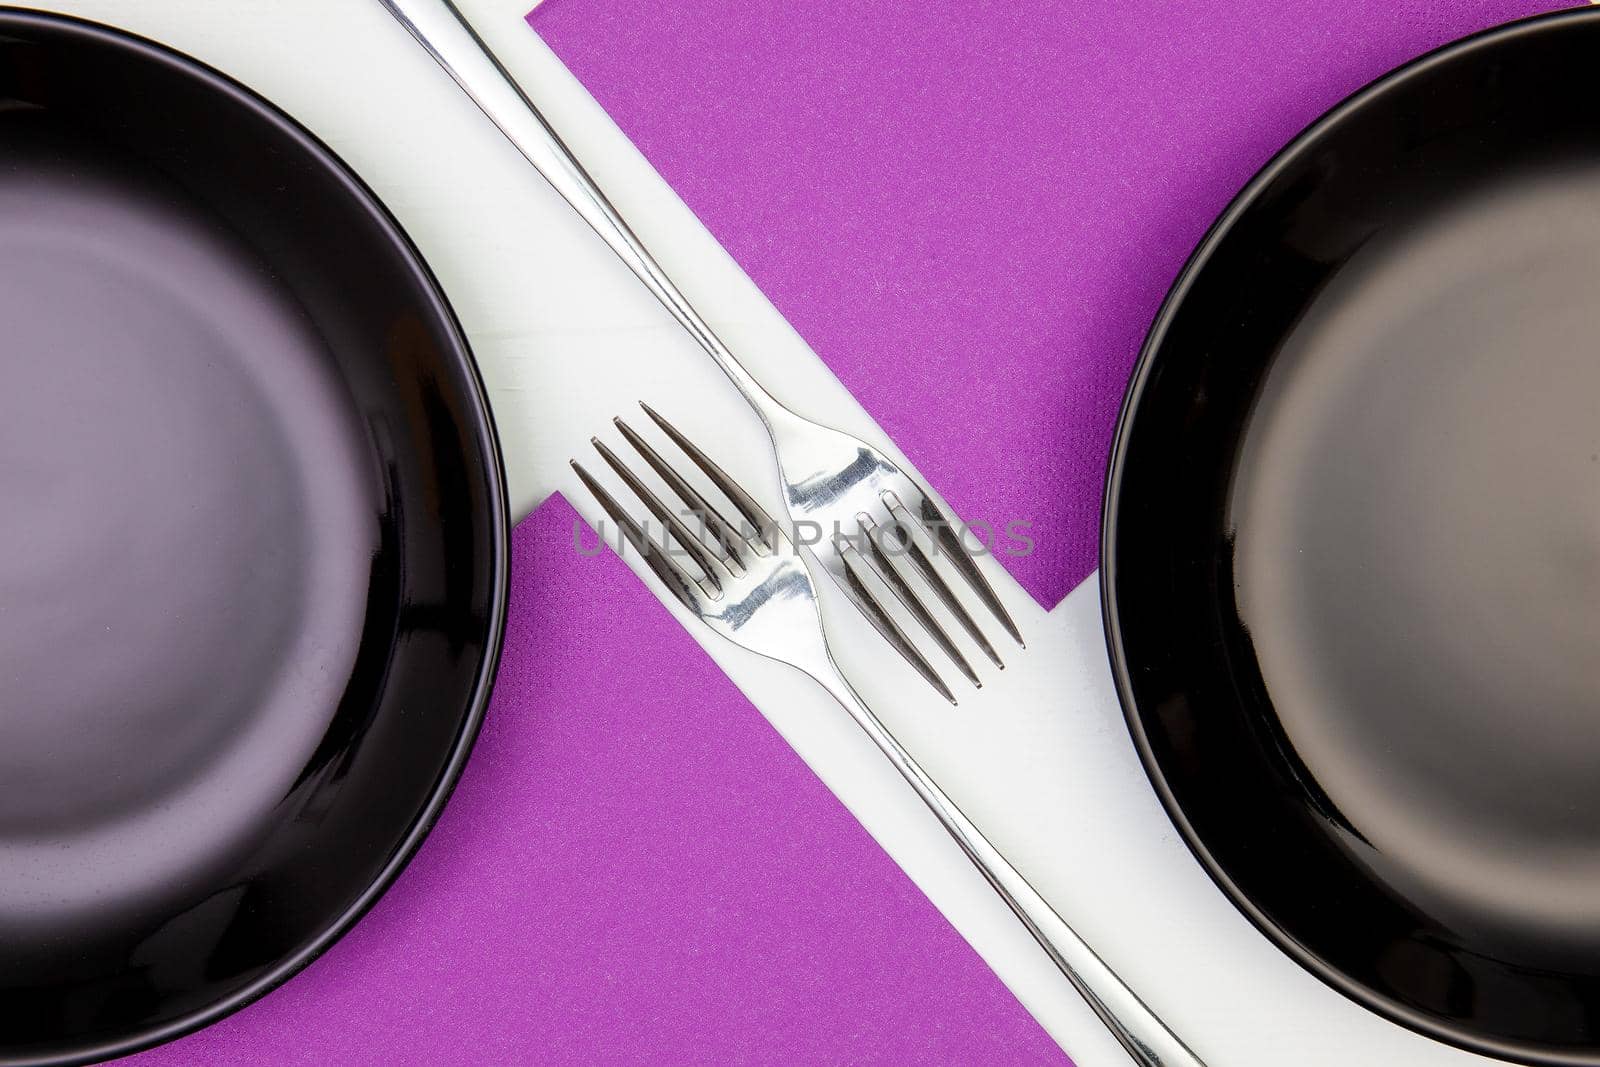 Black plates and purple napkins on the white wooden table.Top view. Flat Lay Image.